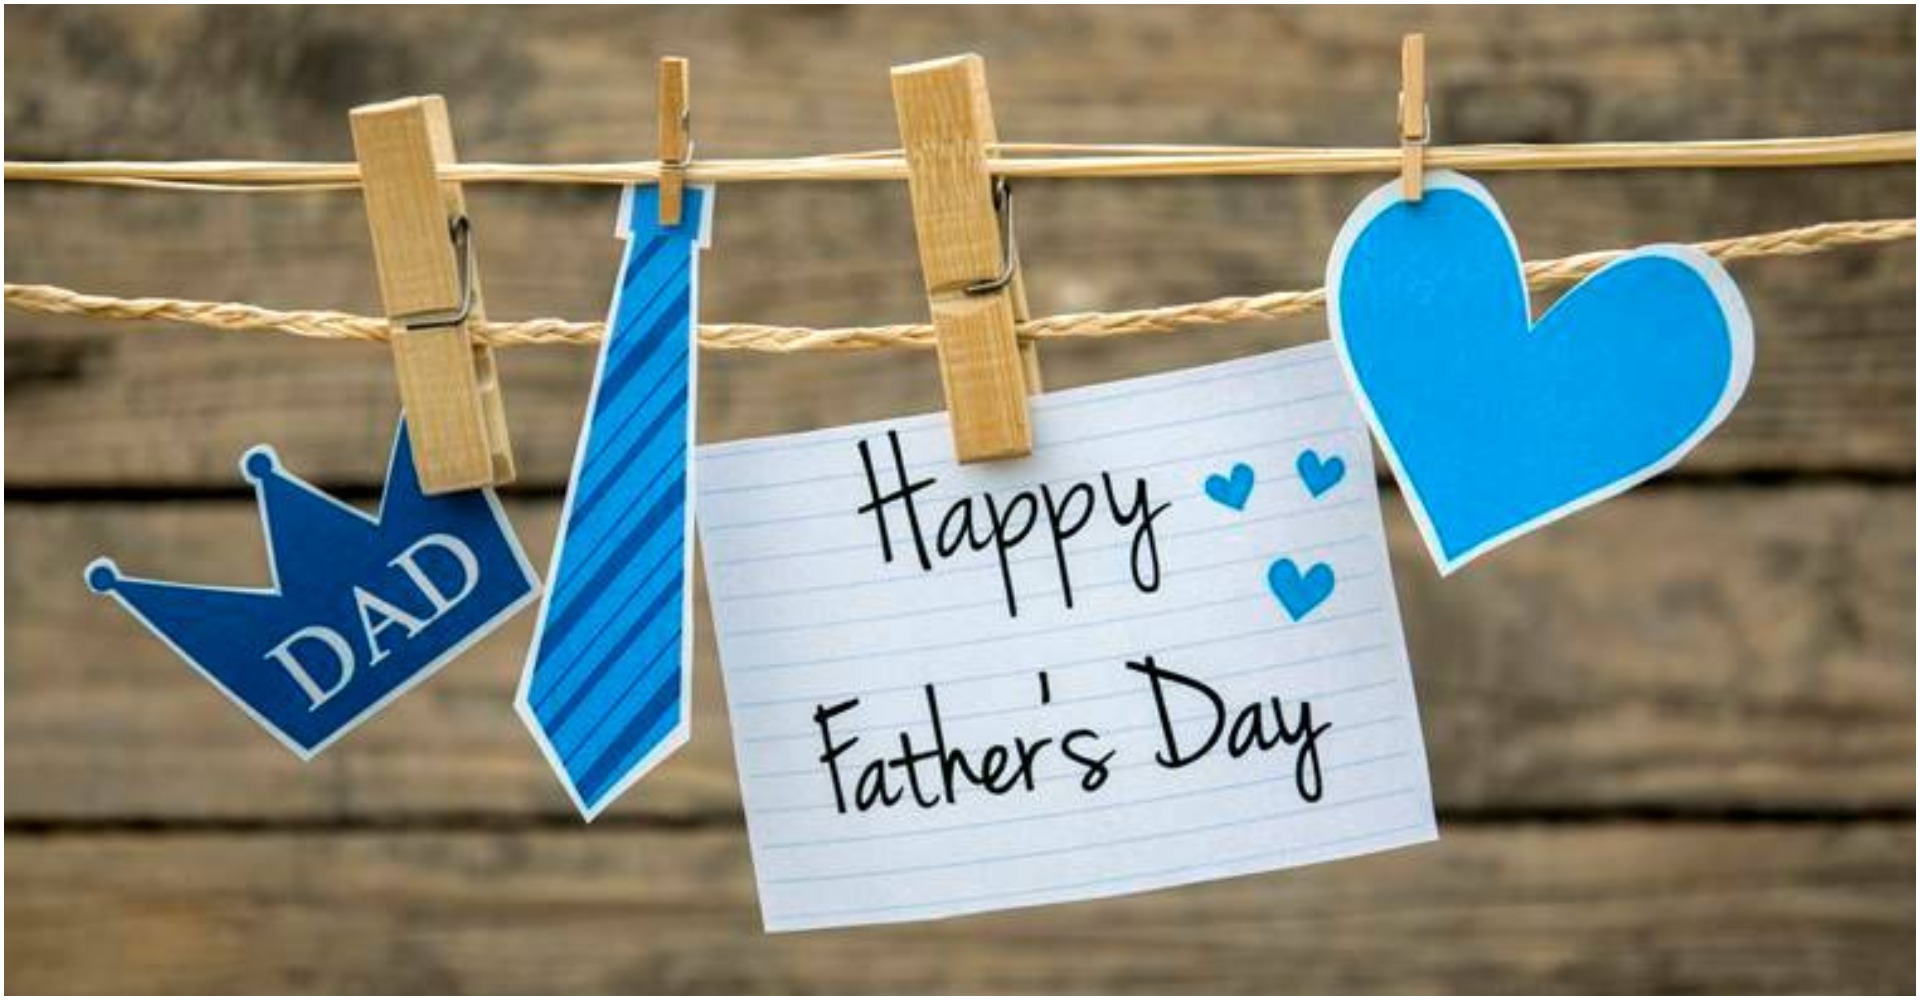 Father's Day is celebrated on the third Sunday of June every year